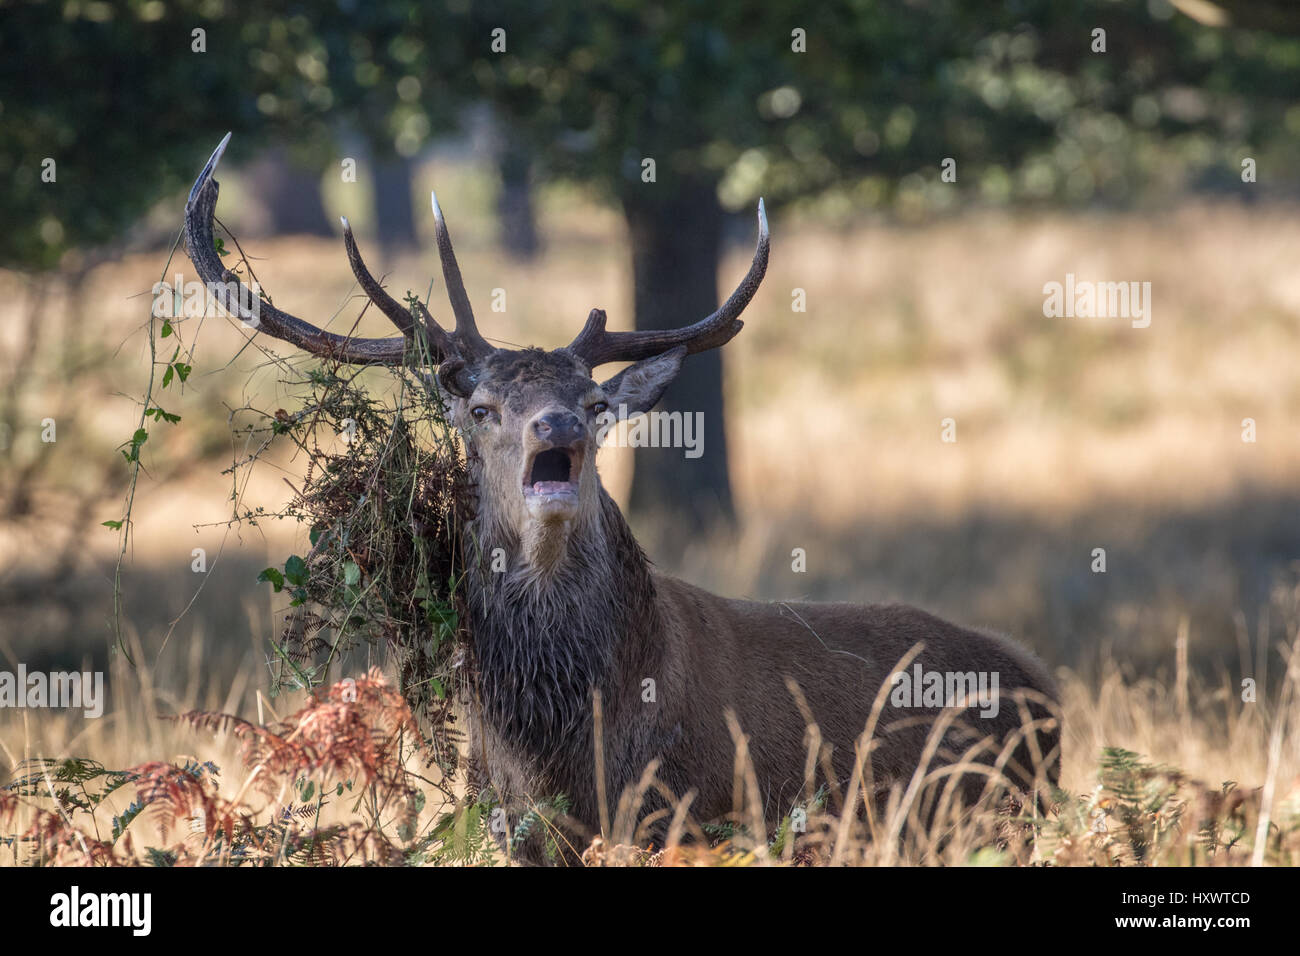 Red Deer Stag (Cervus elaphus) Bellowing During Rut in Richmond Park. Foliage on the Antlers. Stock Photo